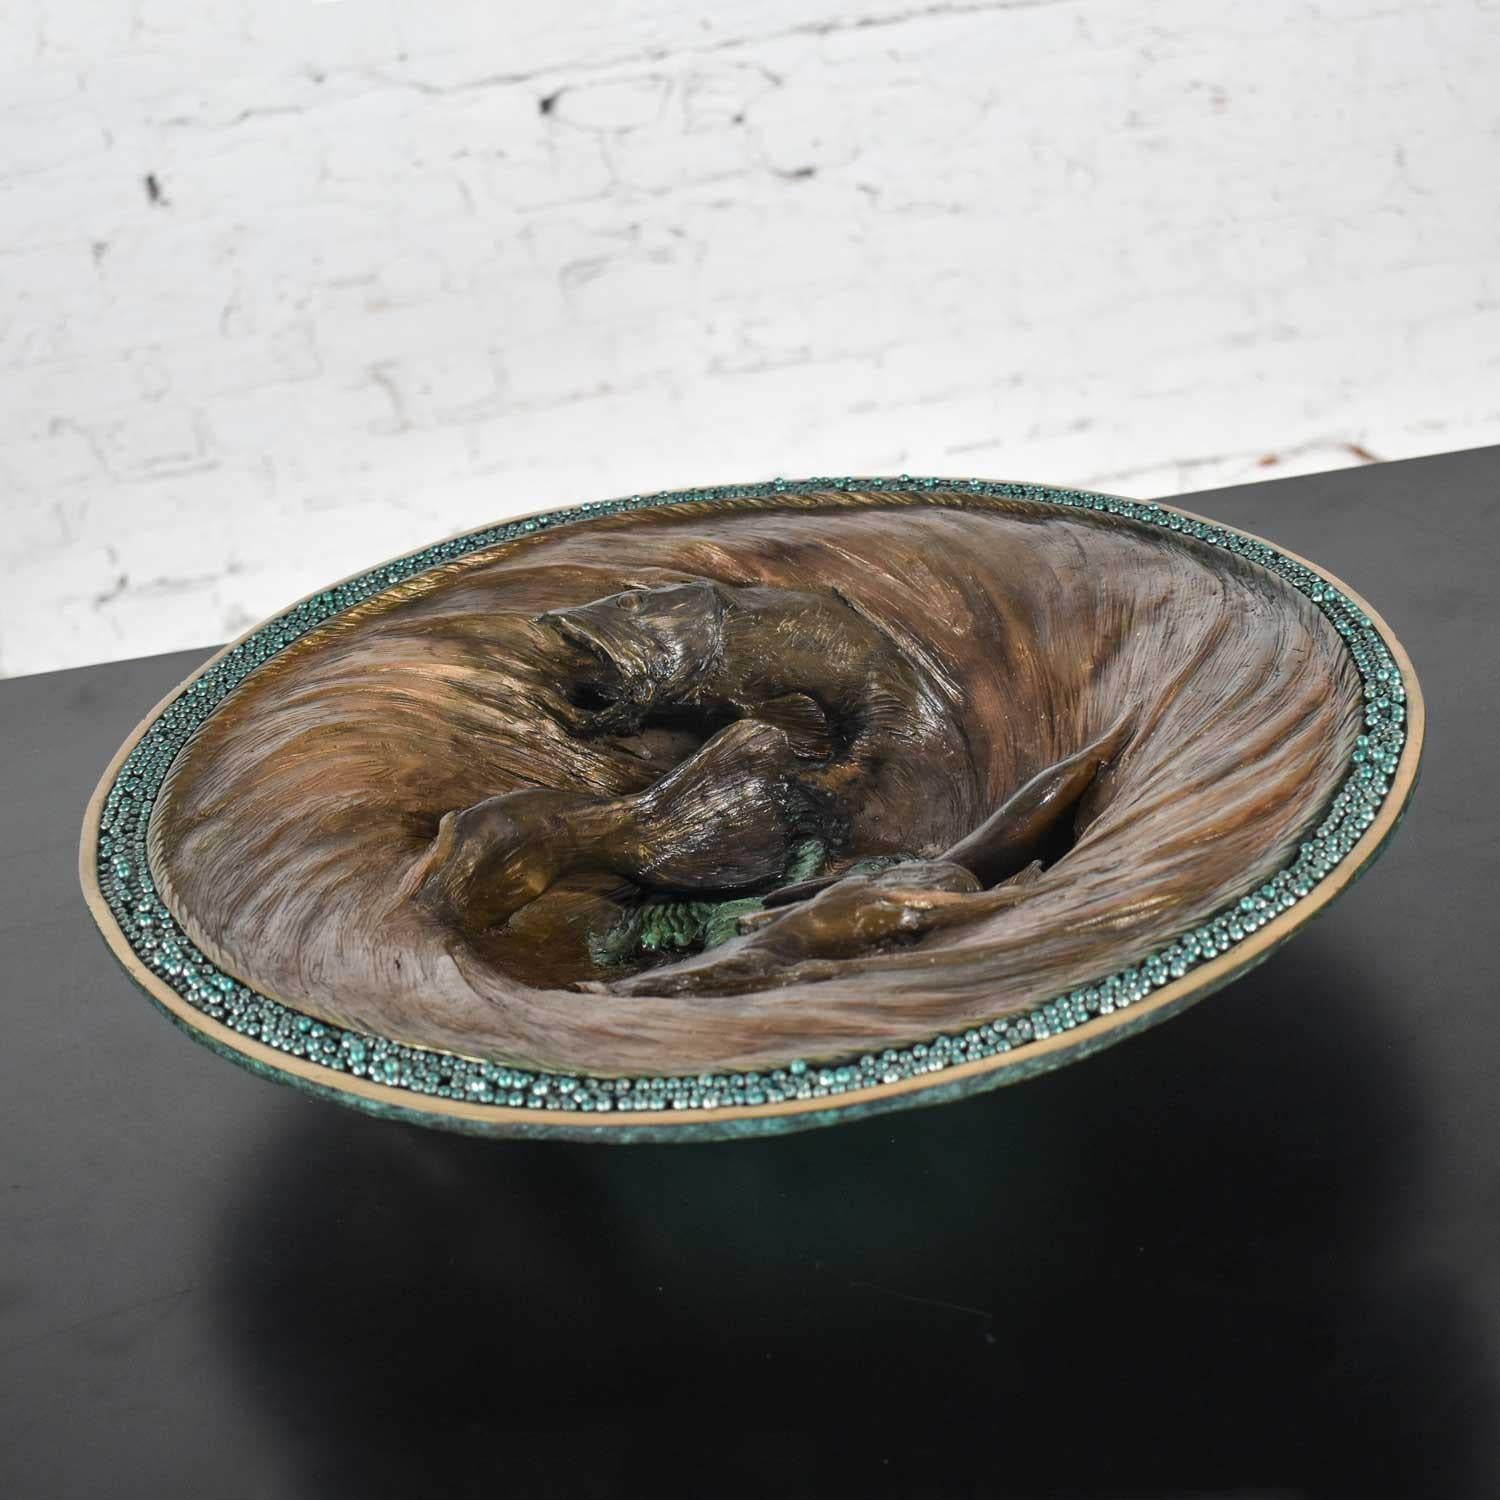 Fabulous organic modern bronze fishbowl sculpture by John Forsythe comprised of cast bronze with golden bronze and green patination. Gorgeous vintage condition with no outstanding flaws that we have found. Please see photos. Circa 1993.

No human